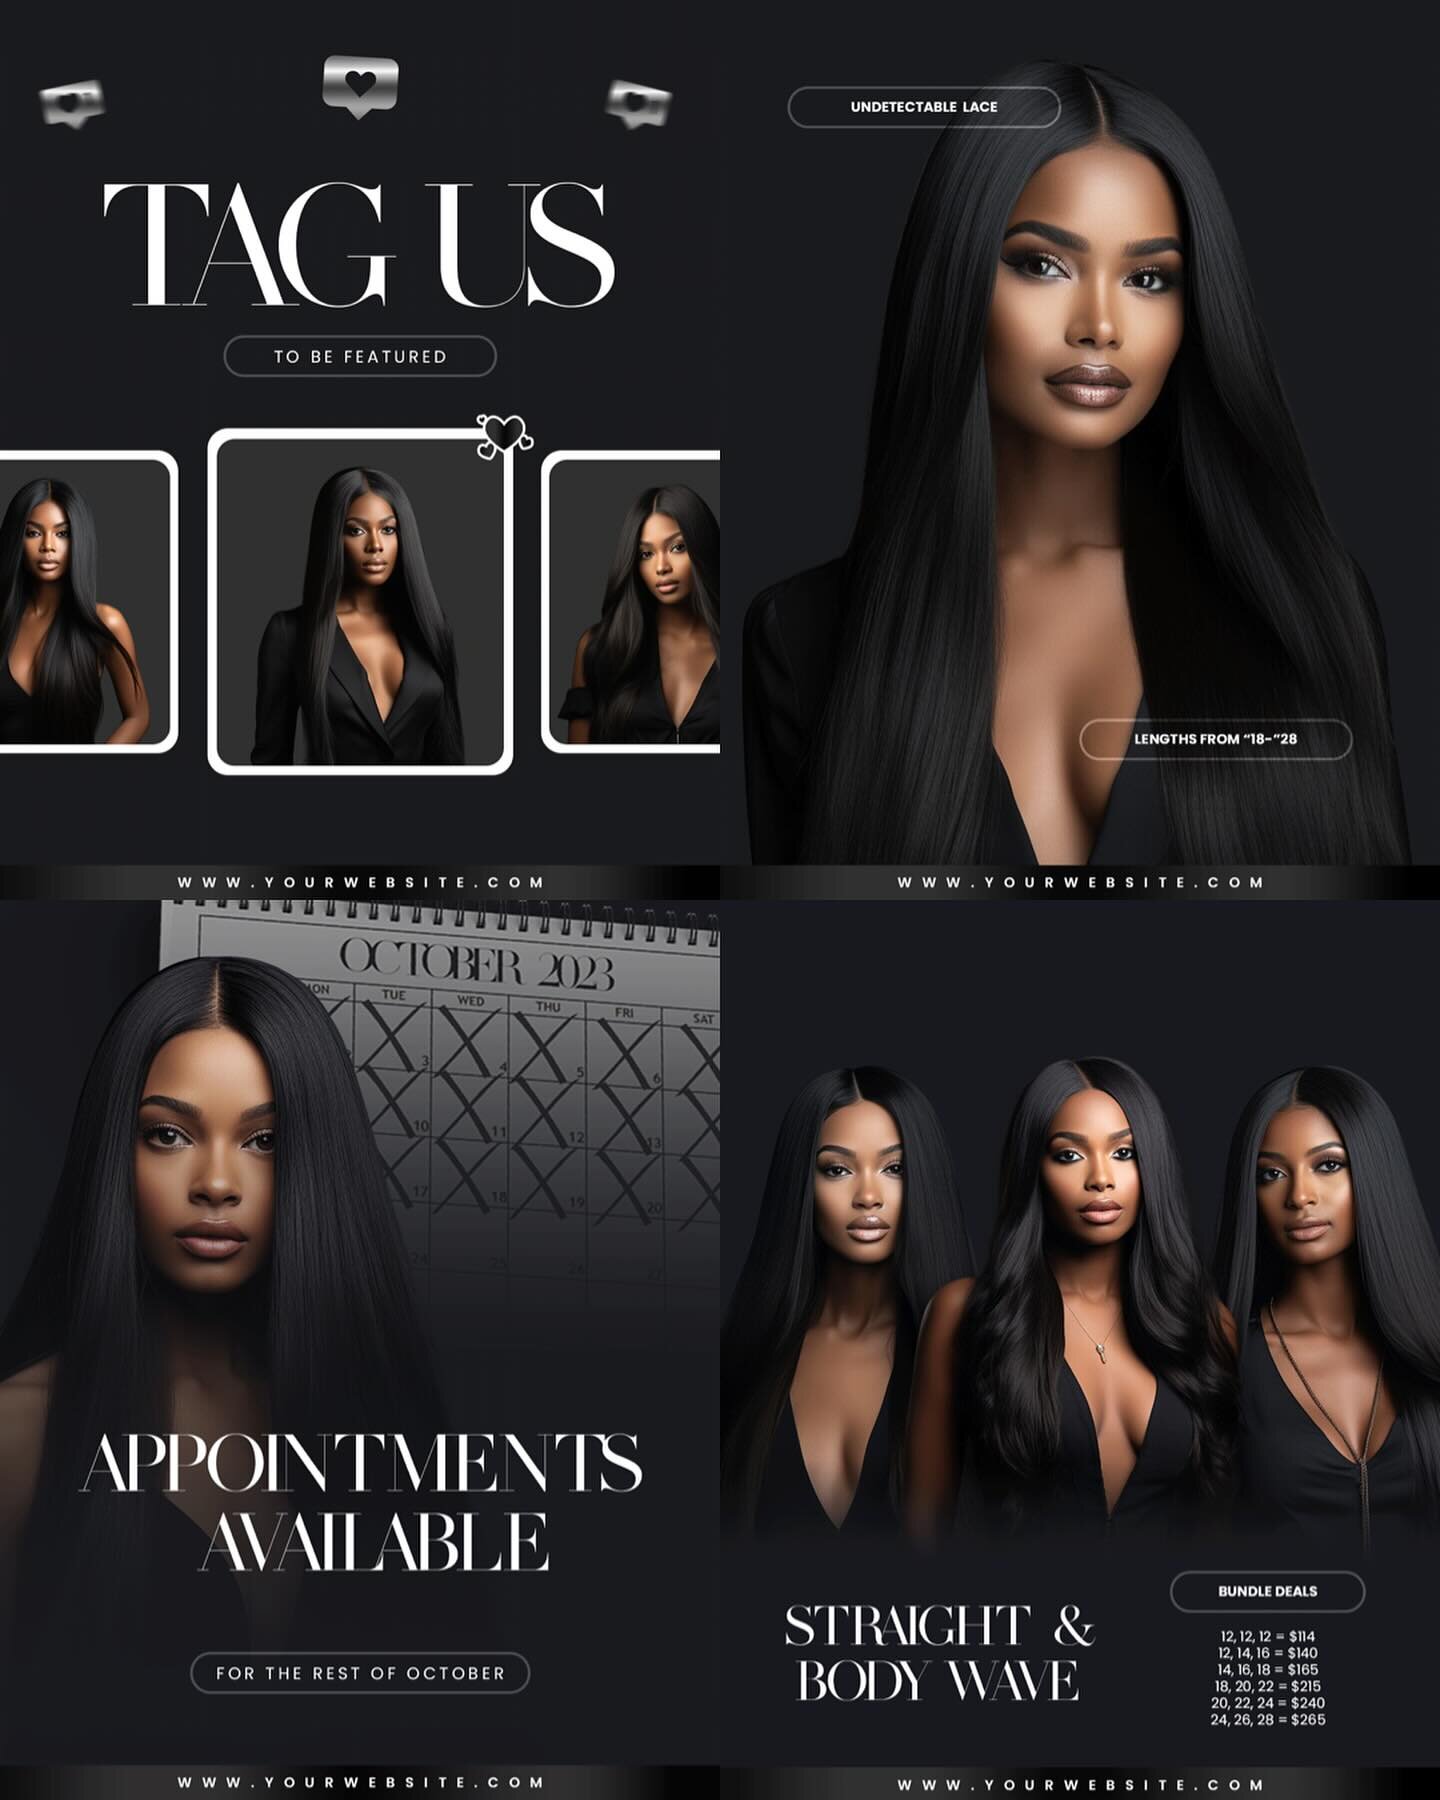 POV: I&rsquo;m a designer putting out a manifestation of my next client. Here&rsquo;s the ai models I&rsquo;ve created in action! Let&rsquo;s be fr 👩🏽&zwj;💻 I snapped! They edit beautifully in @adobeexpress @photoshop @canva 

These stock packs ar